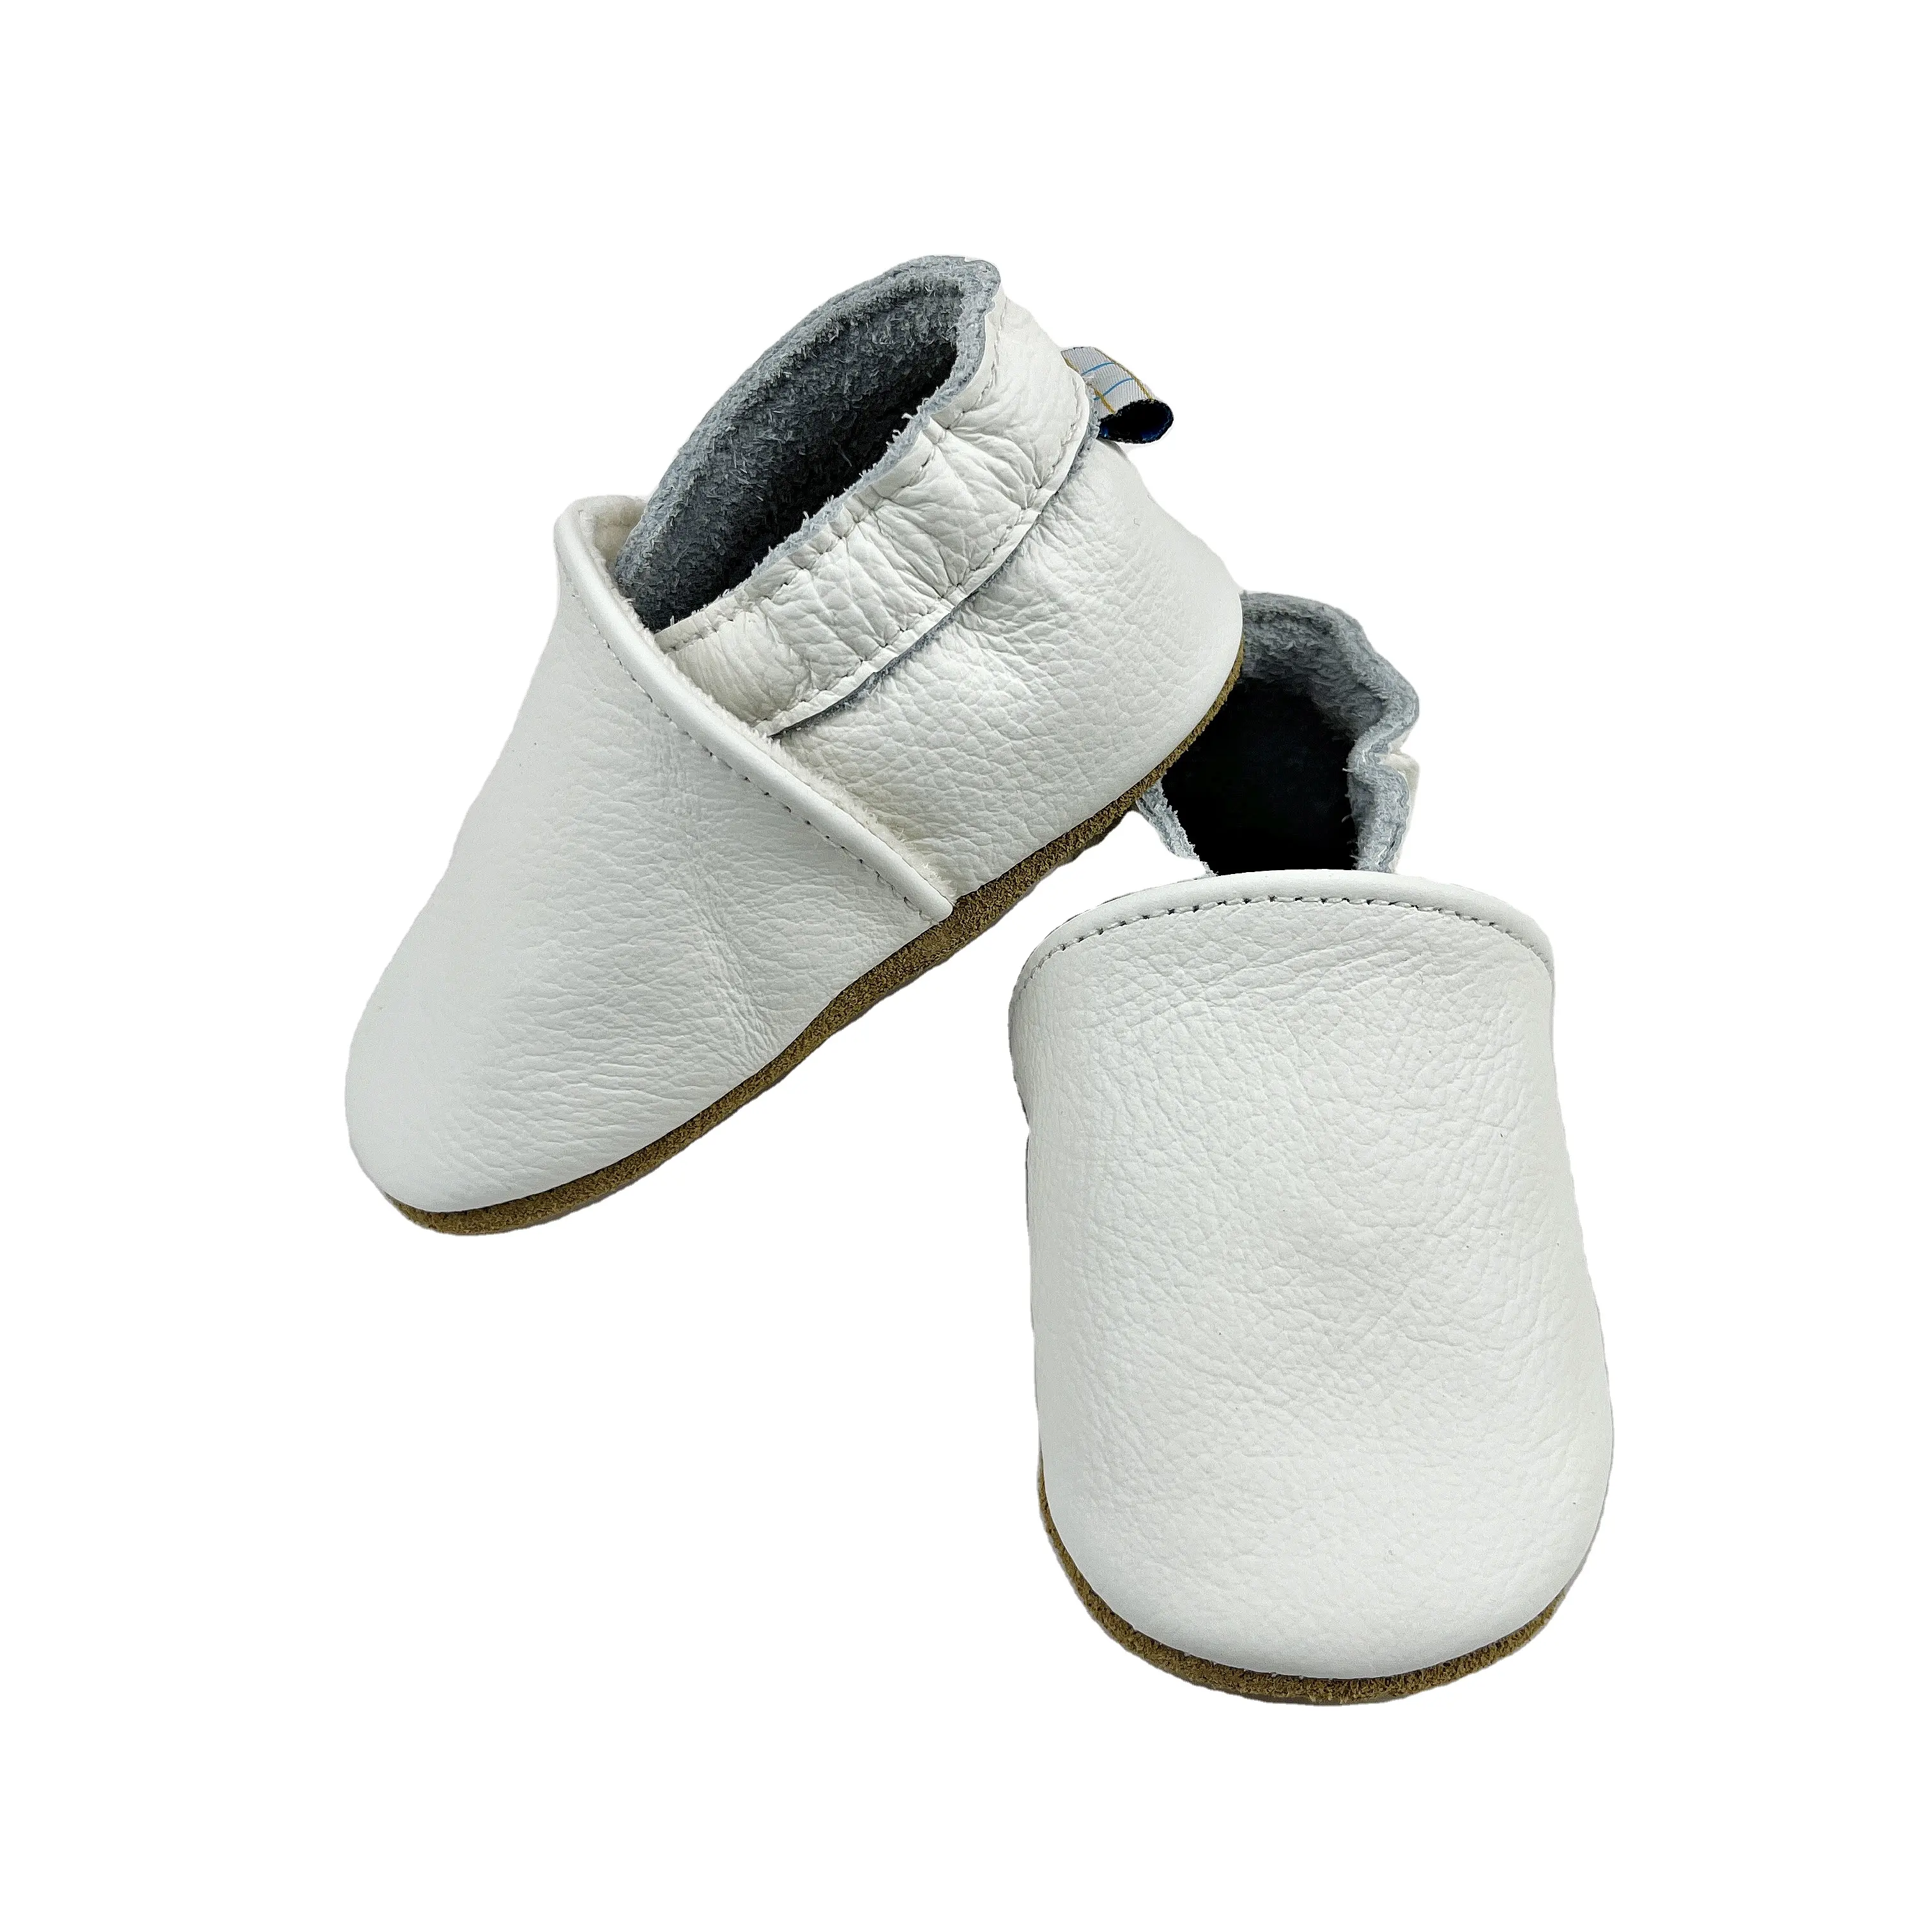 Bede Wholesale pretty white baby learning walking shoes Indoor walking shoes baby leather shoes